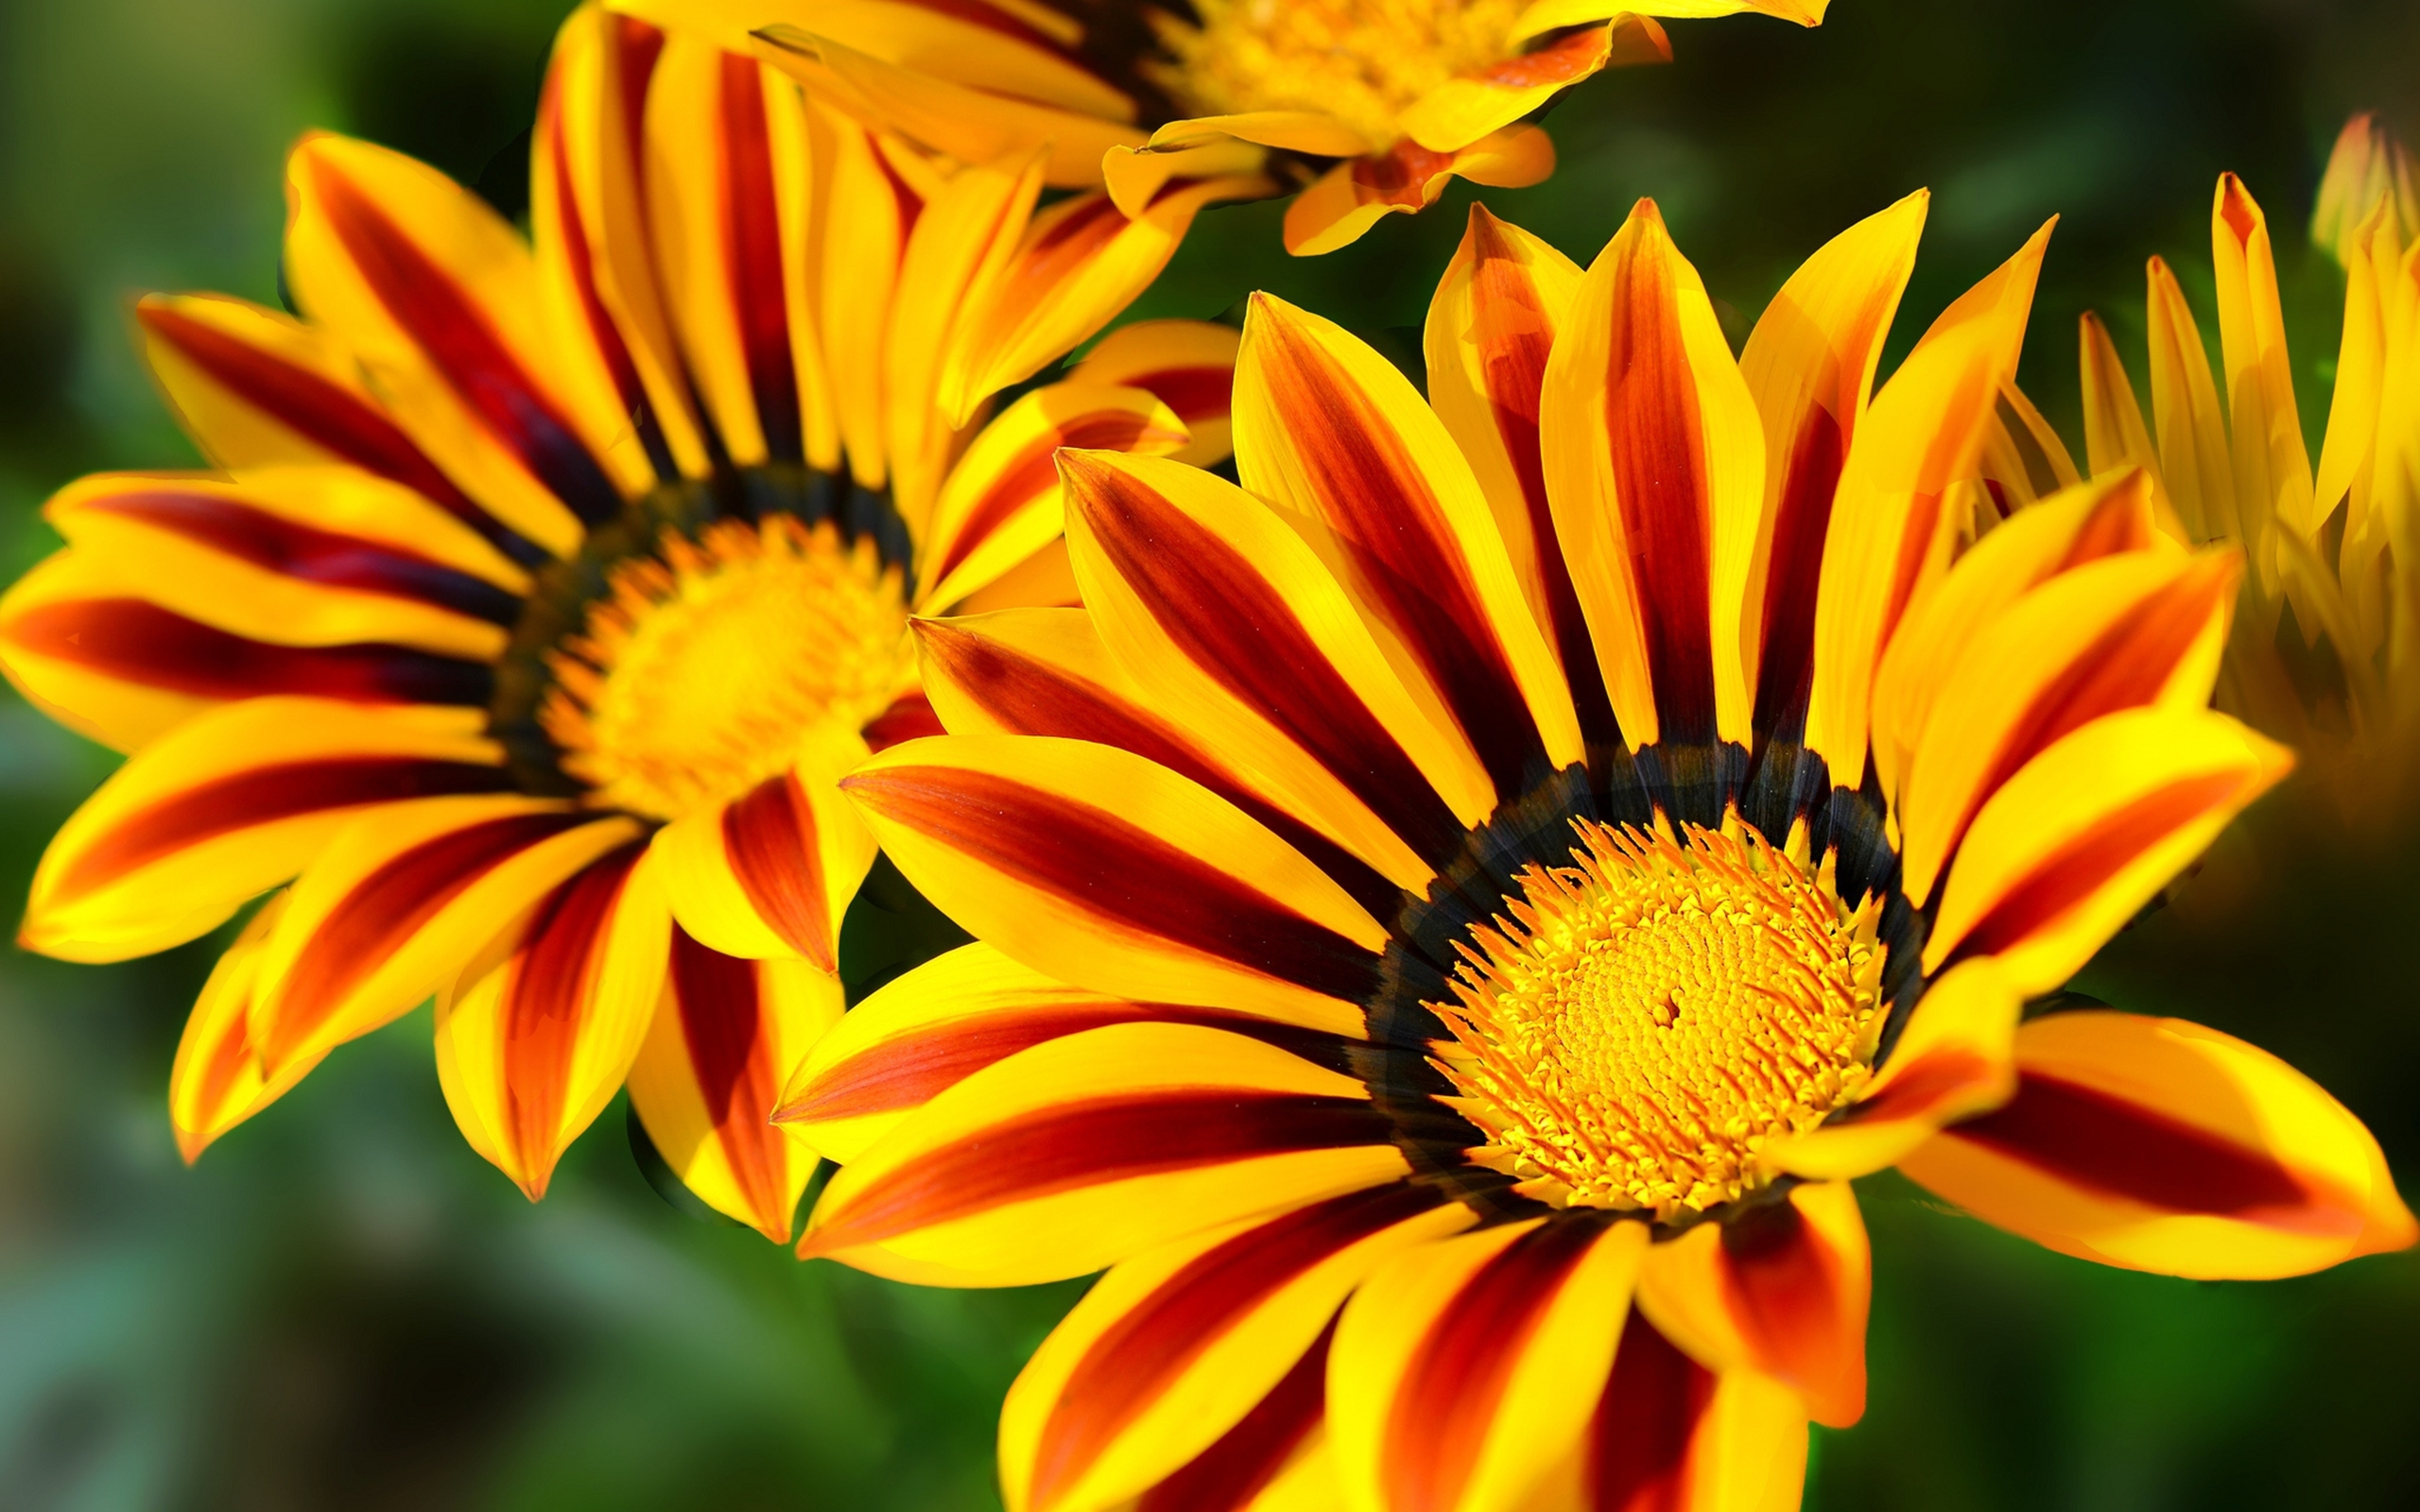 Gazania Flower Wallpaper Images Of Flowers Images Flower Pictures 3 ...